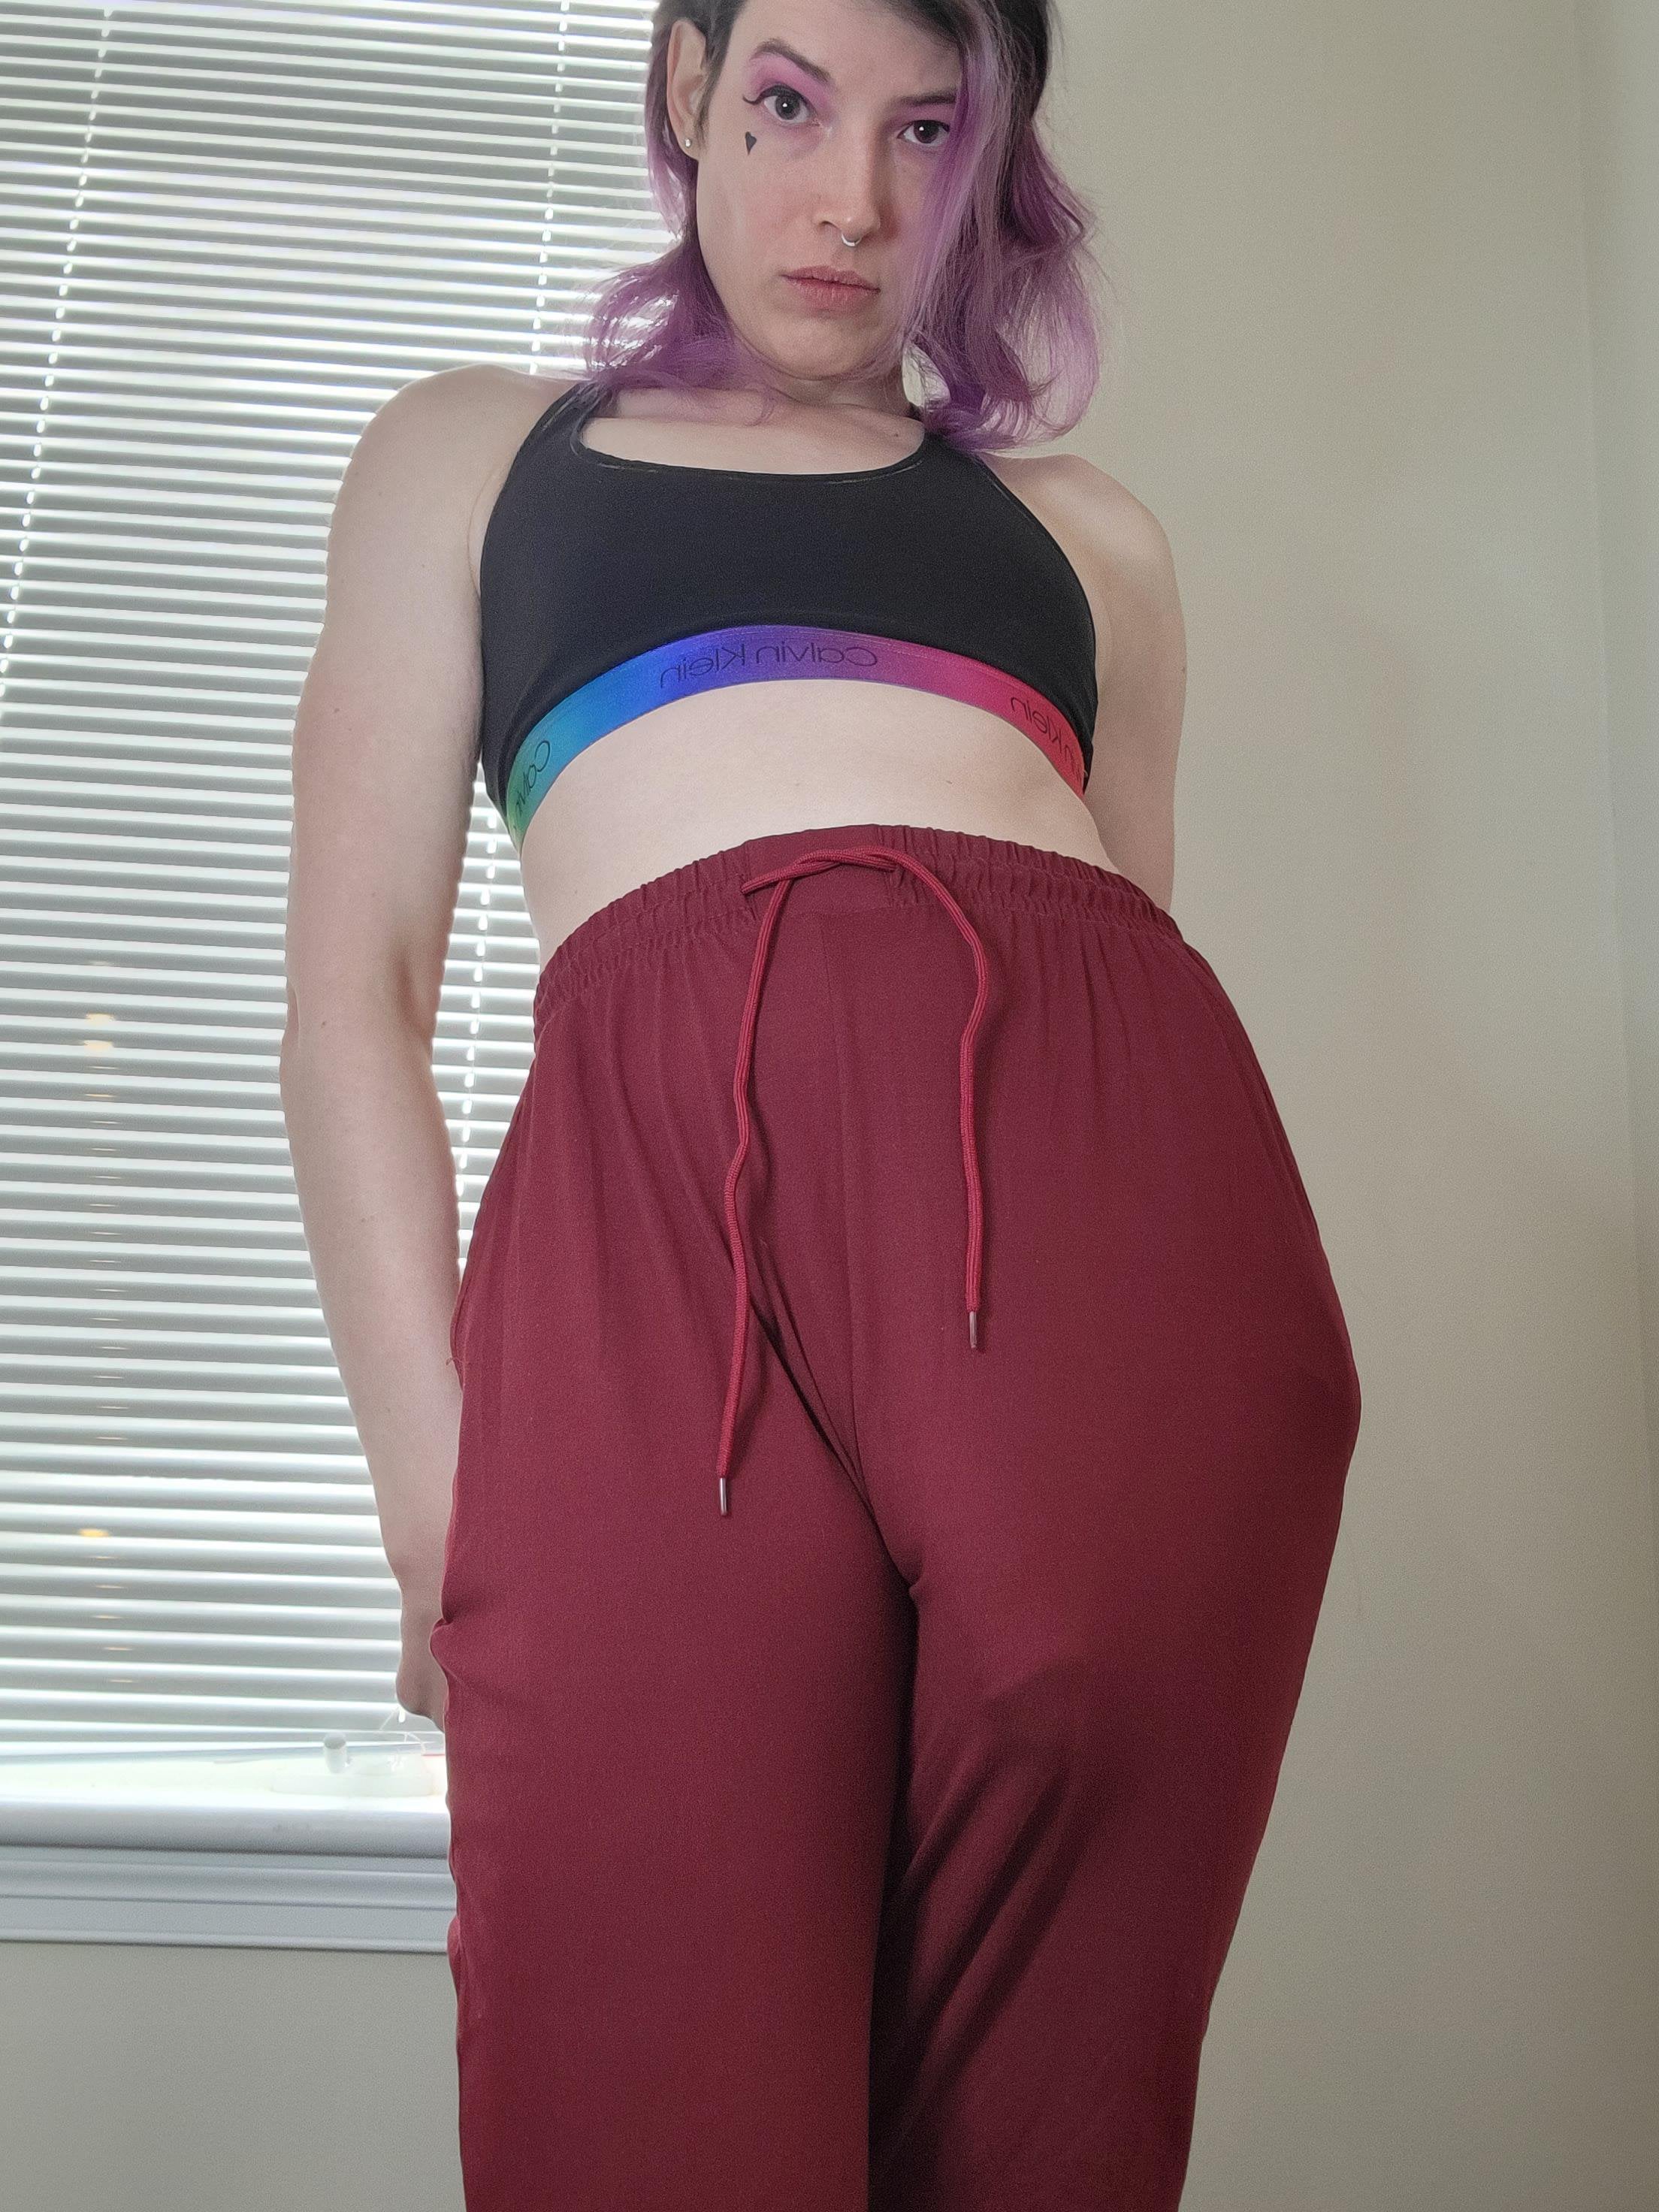 I've gotten a lot of compliments on my sweatpants recently 10f8x36 - transexual woman